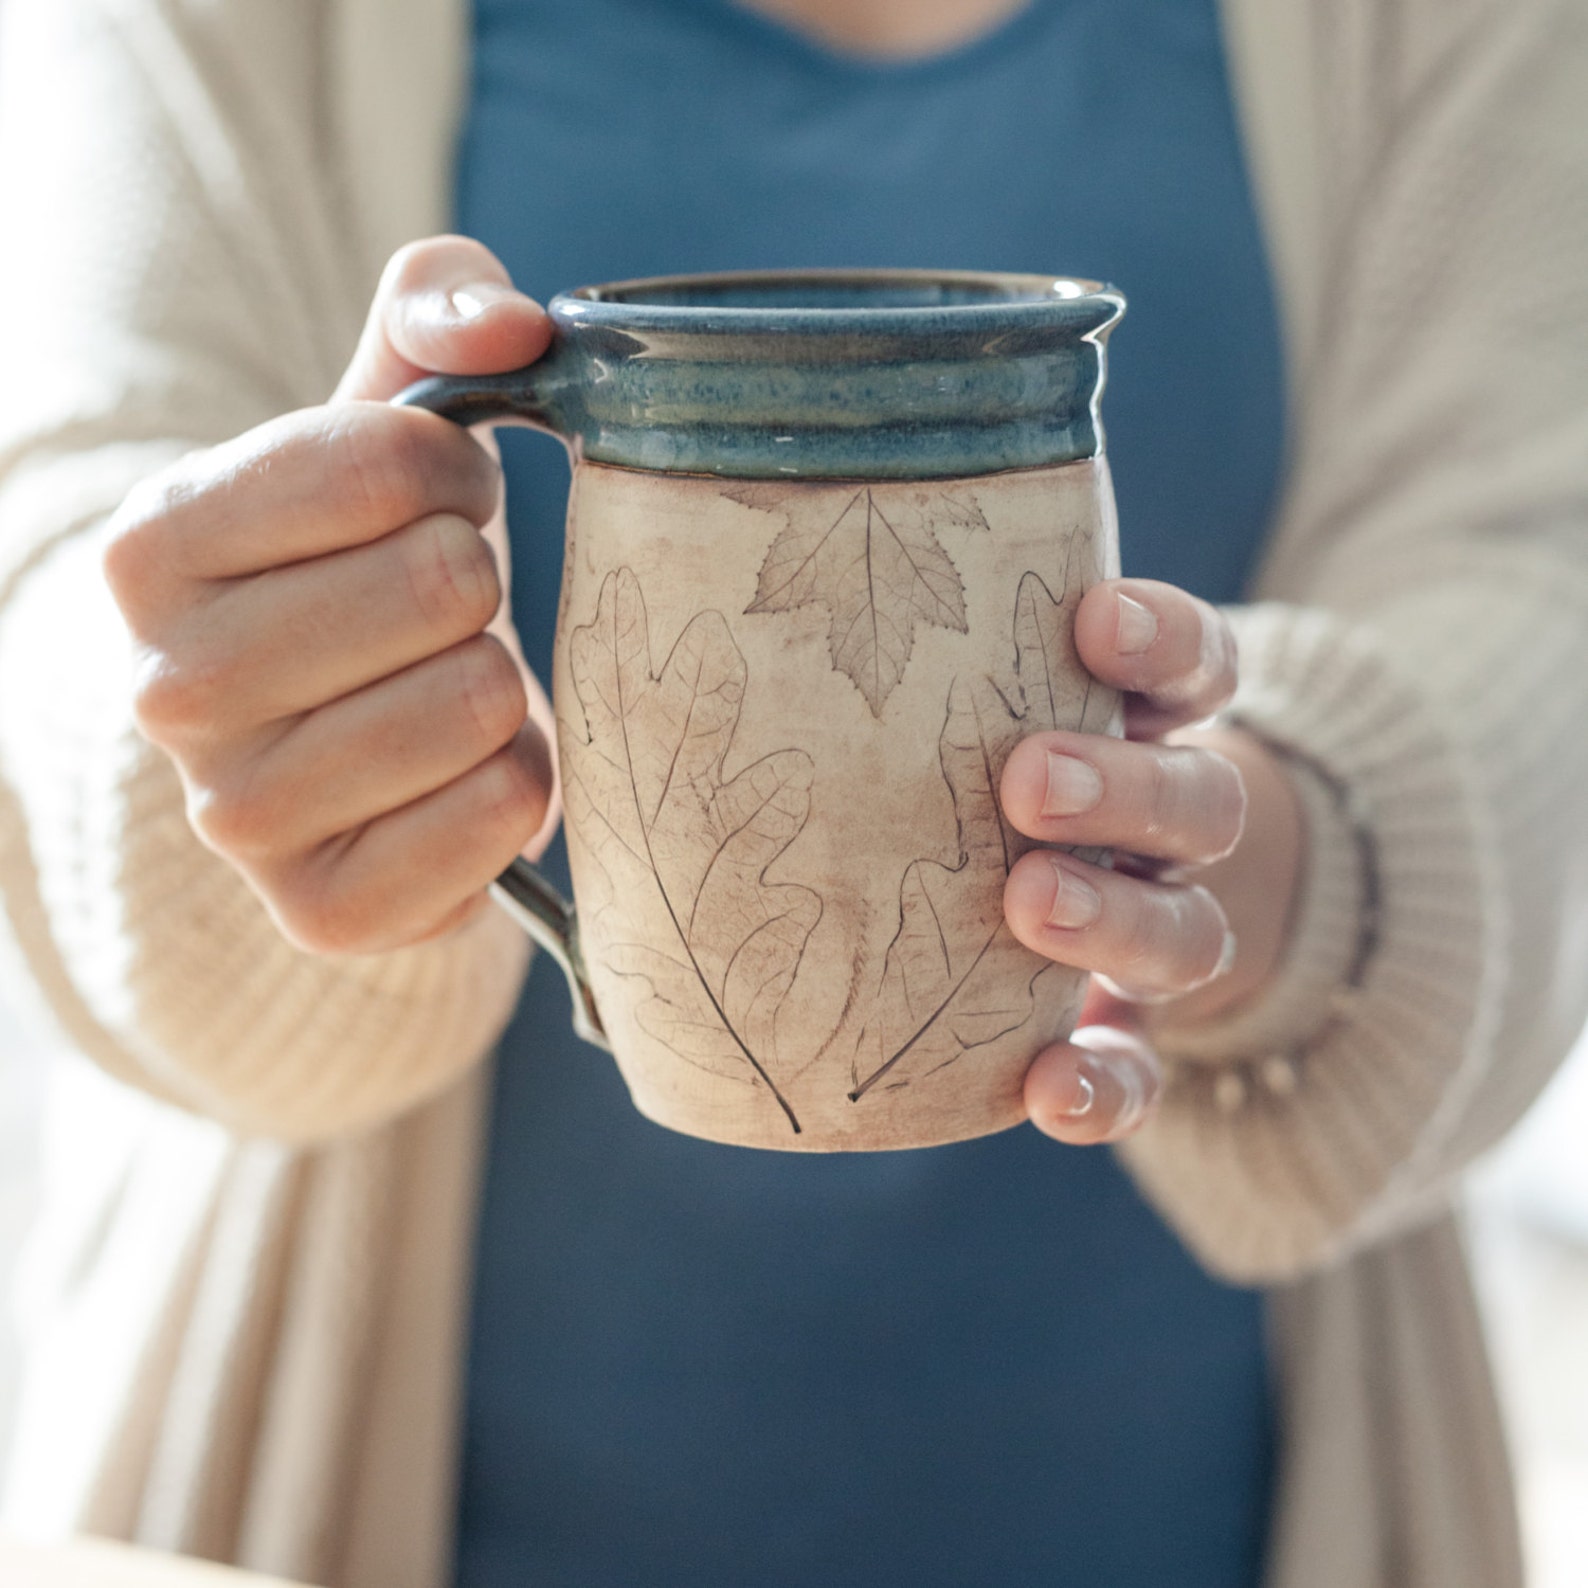 Upgrade your mealtime with this gorgeous kitchenware: Handmade coffee lover's mug from Julia E Dean